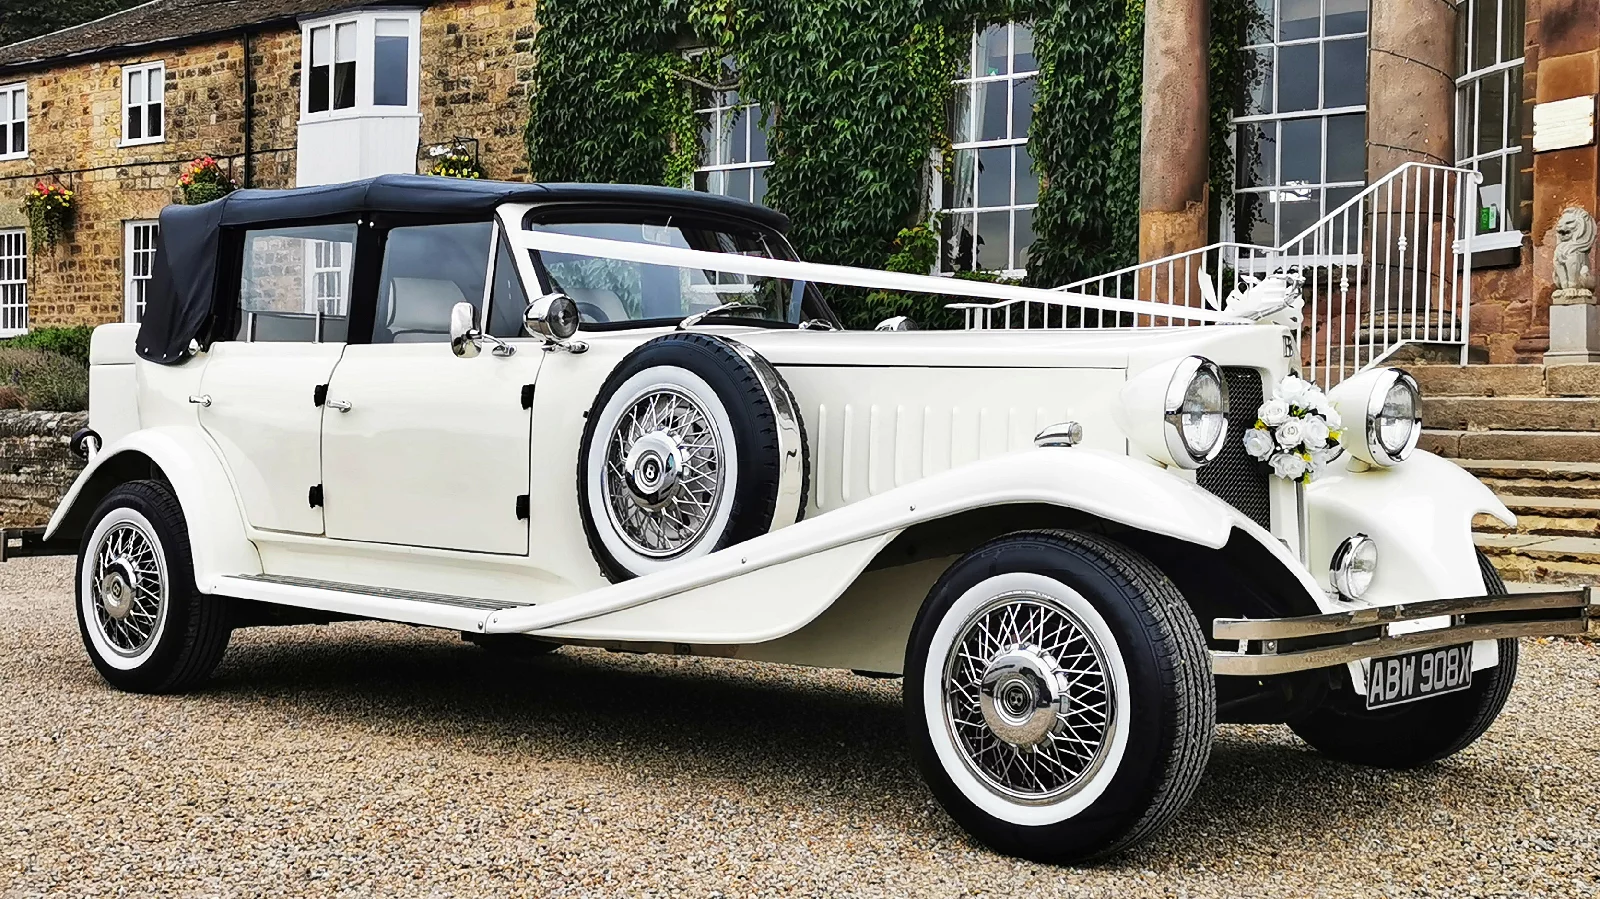 Vintage Style Beauford Convertible for hire in Bradford, Leeds, West Yorkshire